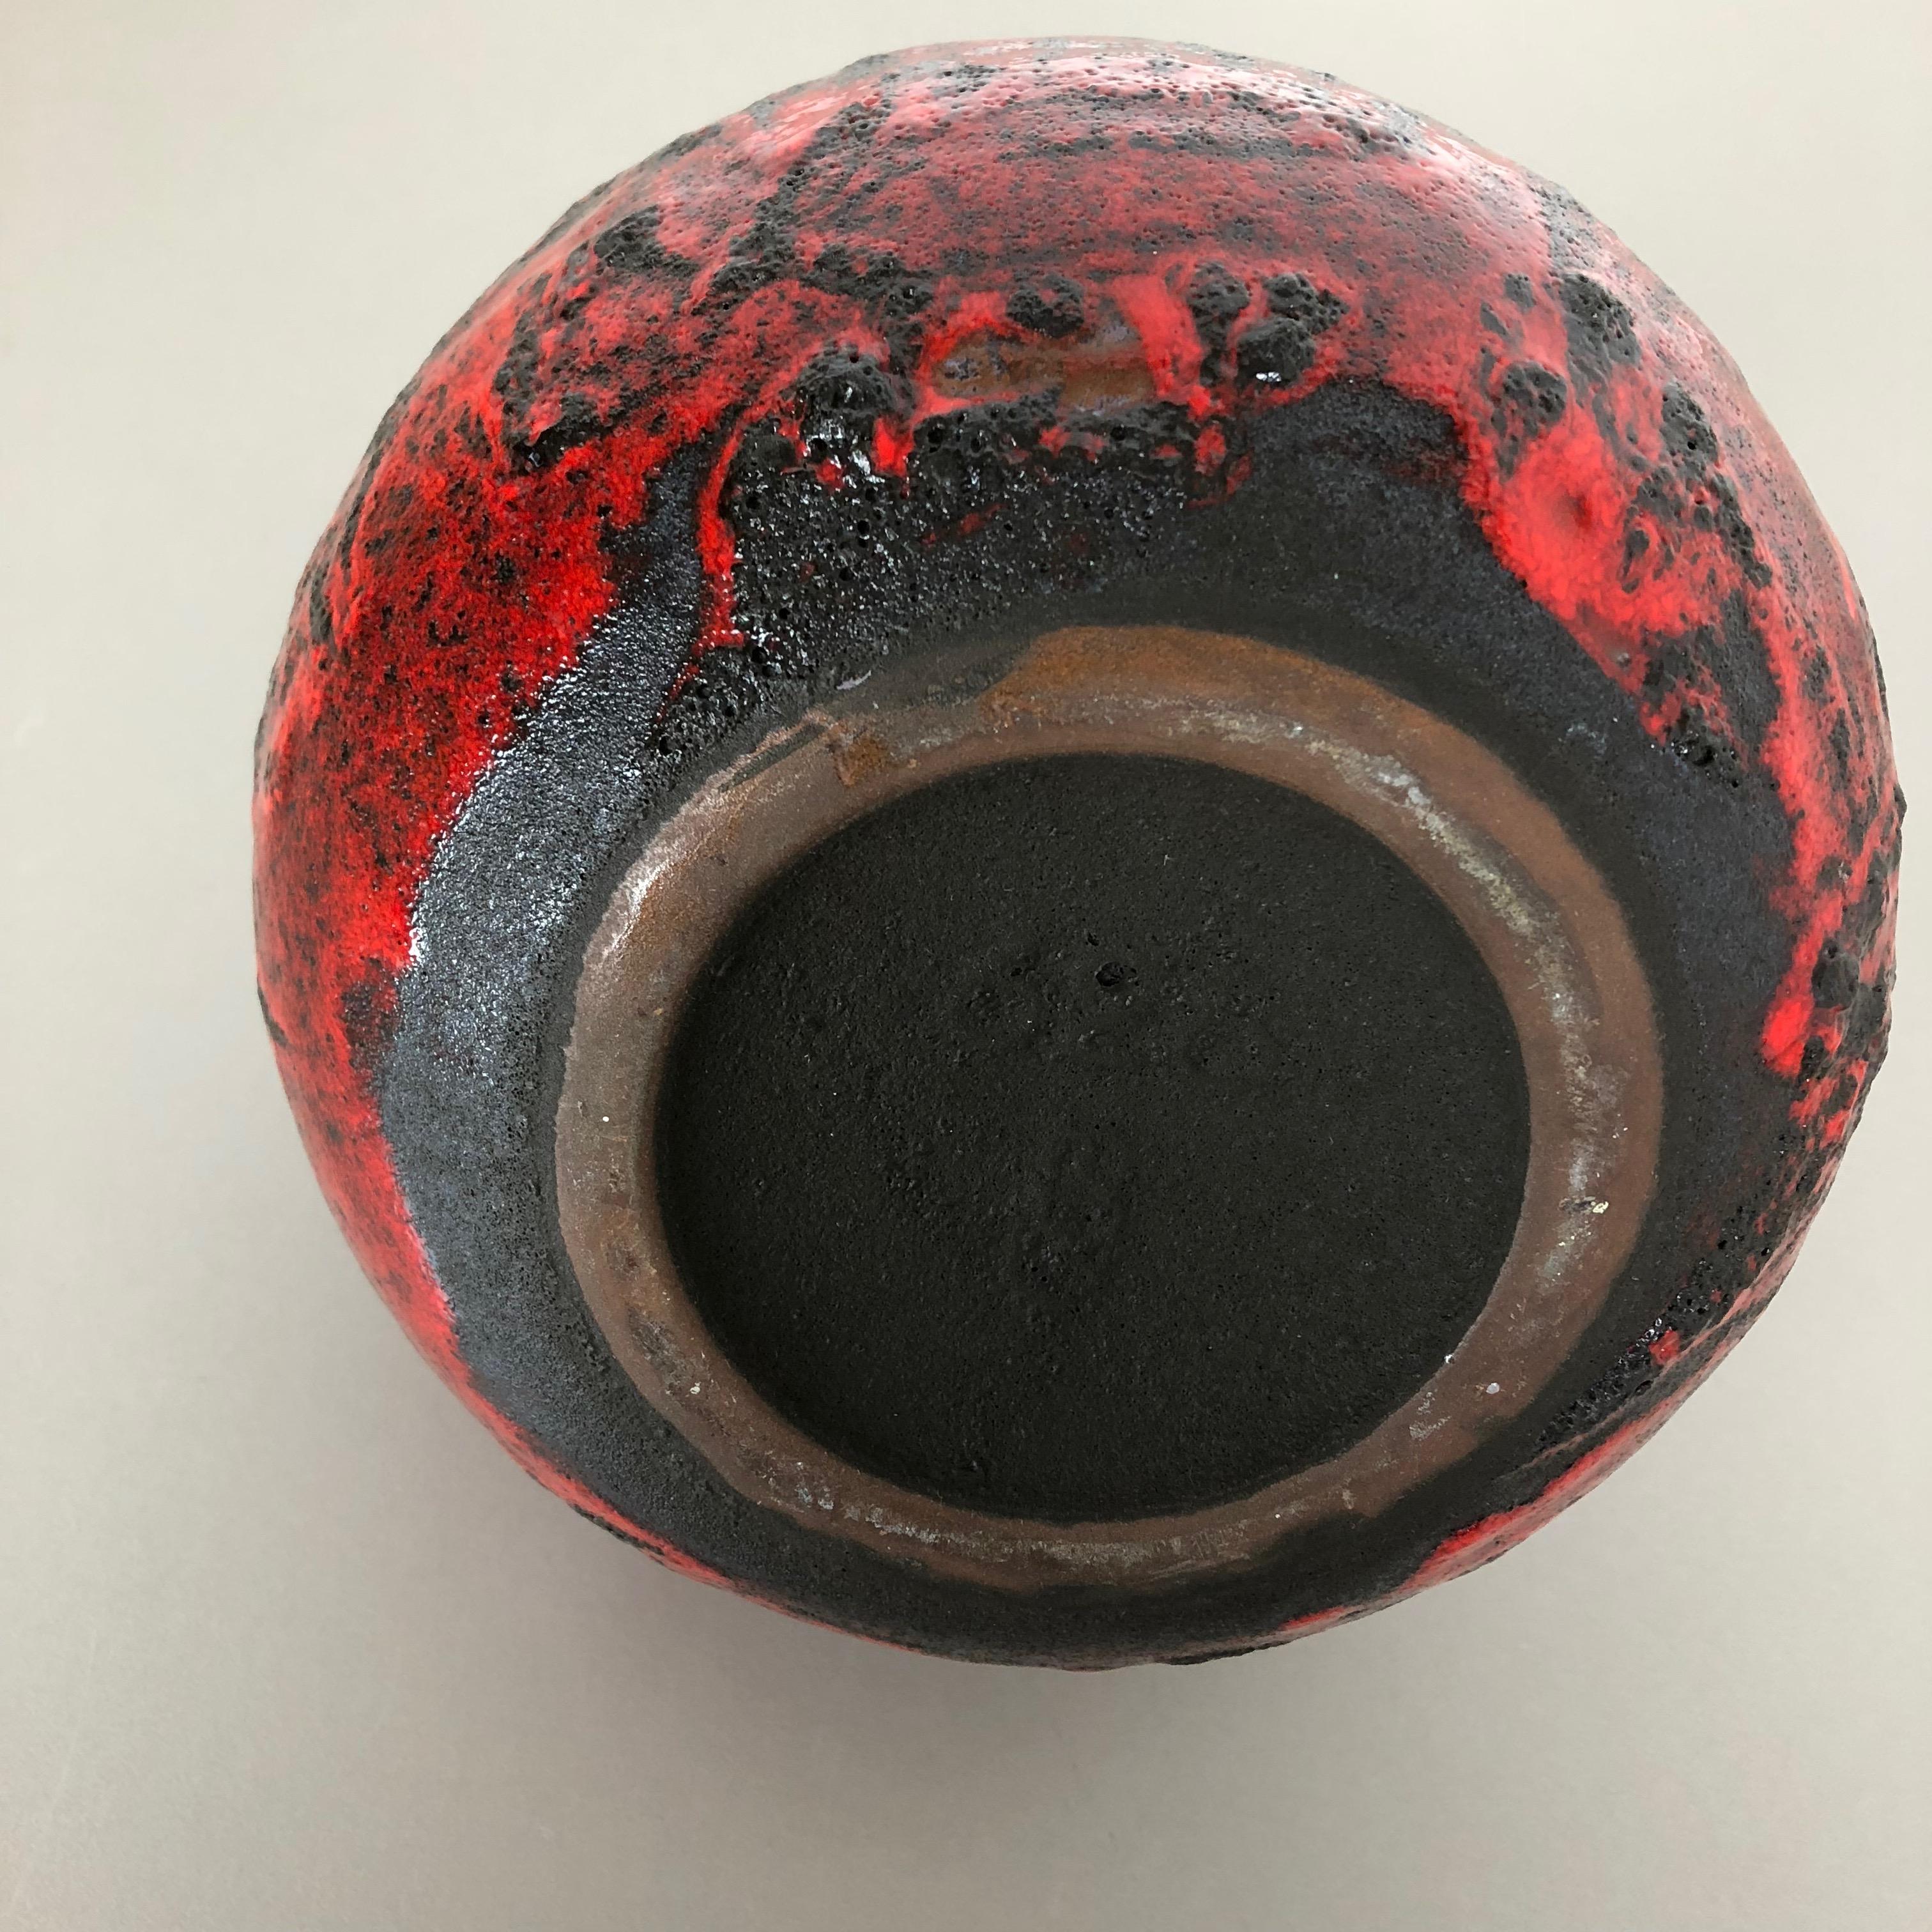 Super Colorful Fat Lava Pottery Vase by Gräflich Ortenburg, Germany, 1960s For Sale 1